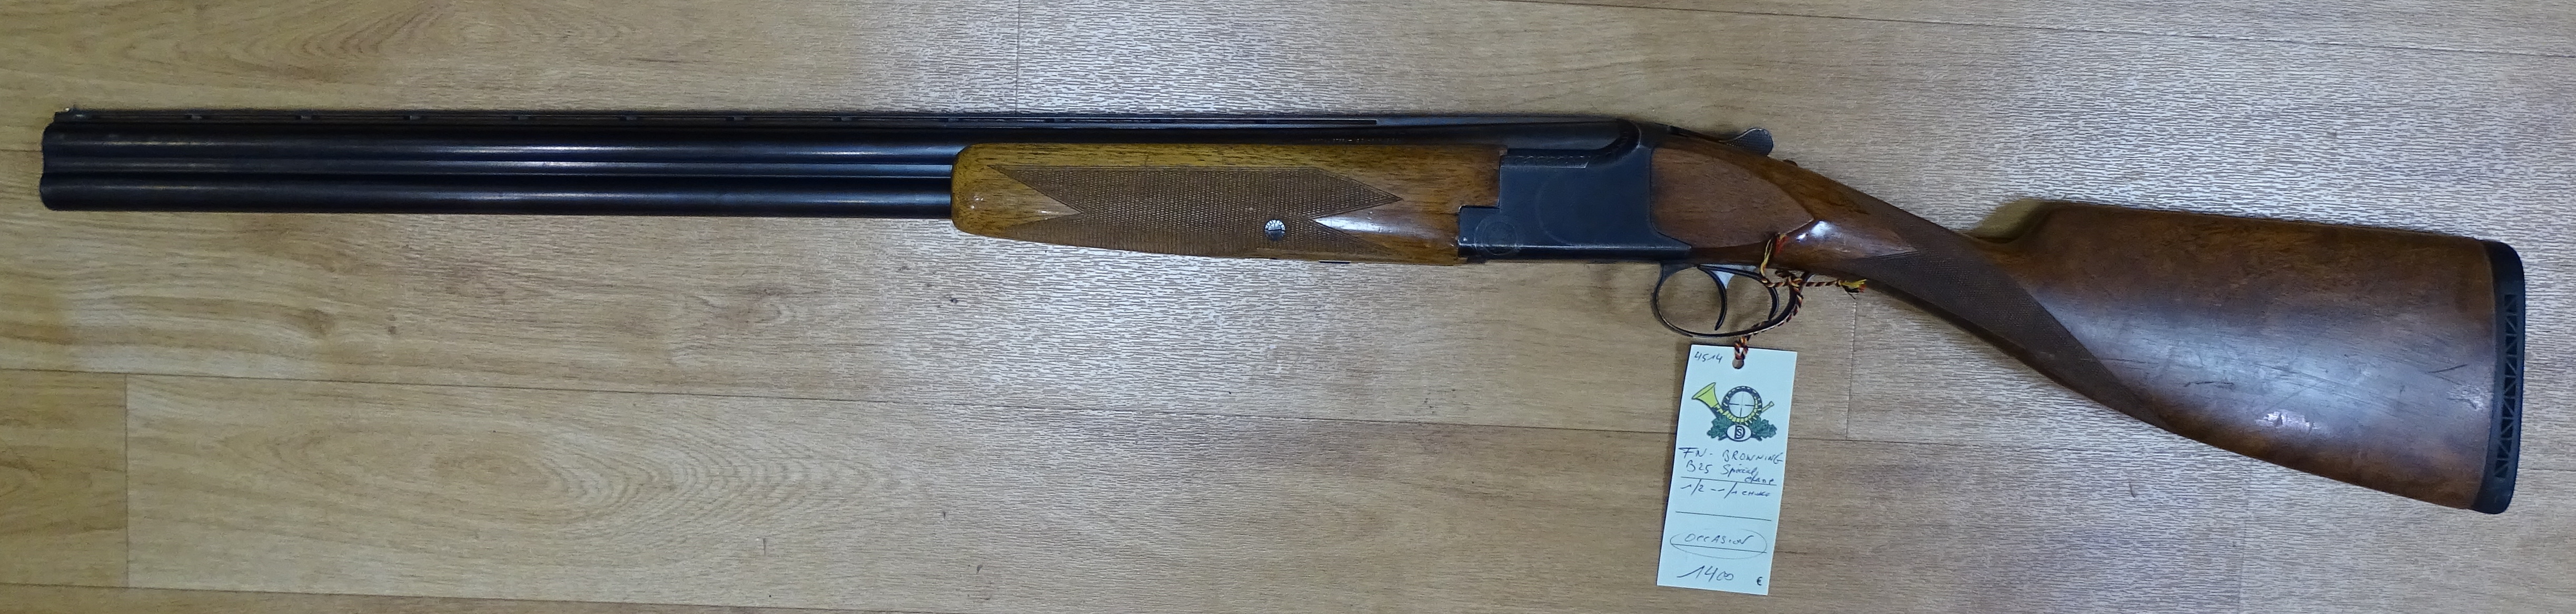 FN - Browning B25 Special chasse